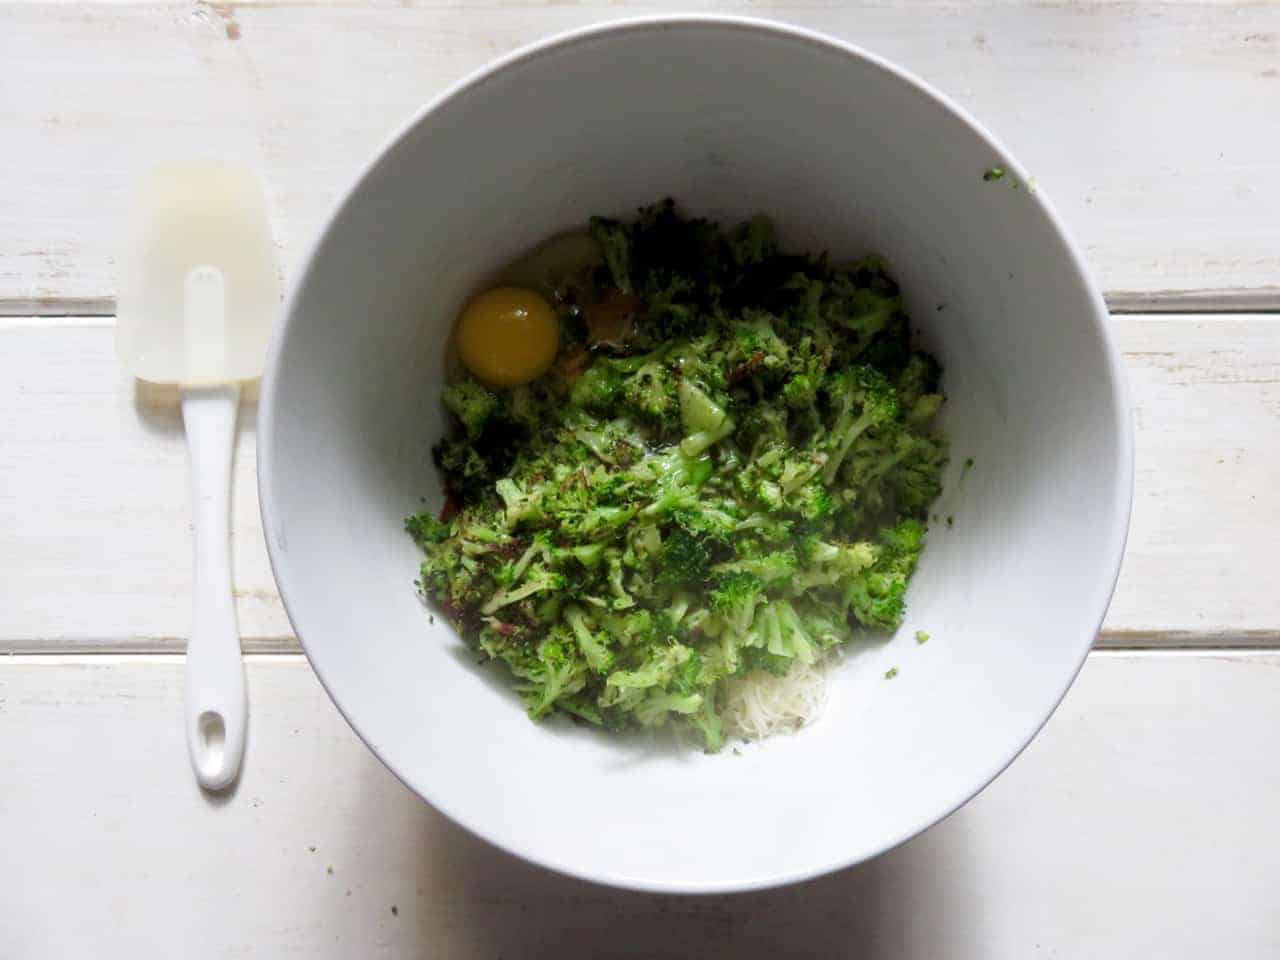 This is an overhead image of a white bowl with broccoli florets, an egg, and some shredded cheese. The bowl sits on white wooden planks and a white spatula lays next to the bowl.